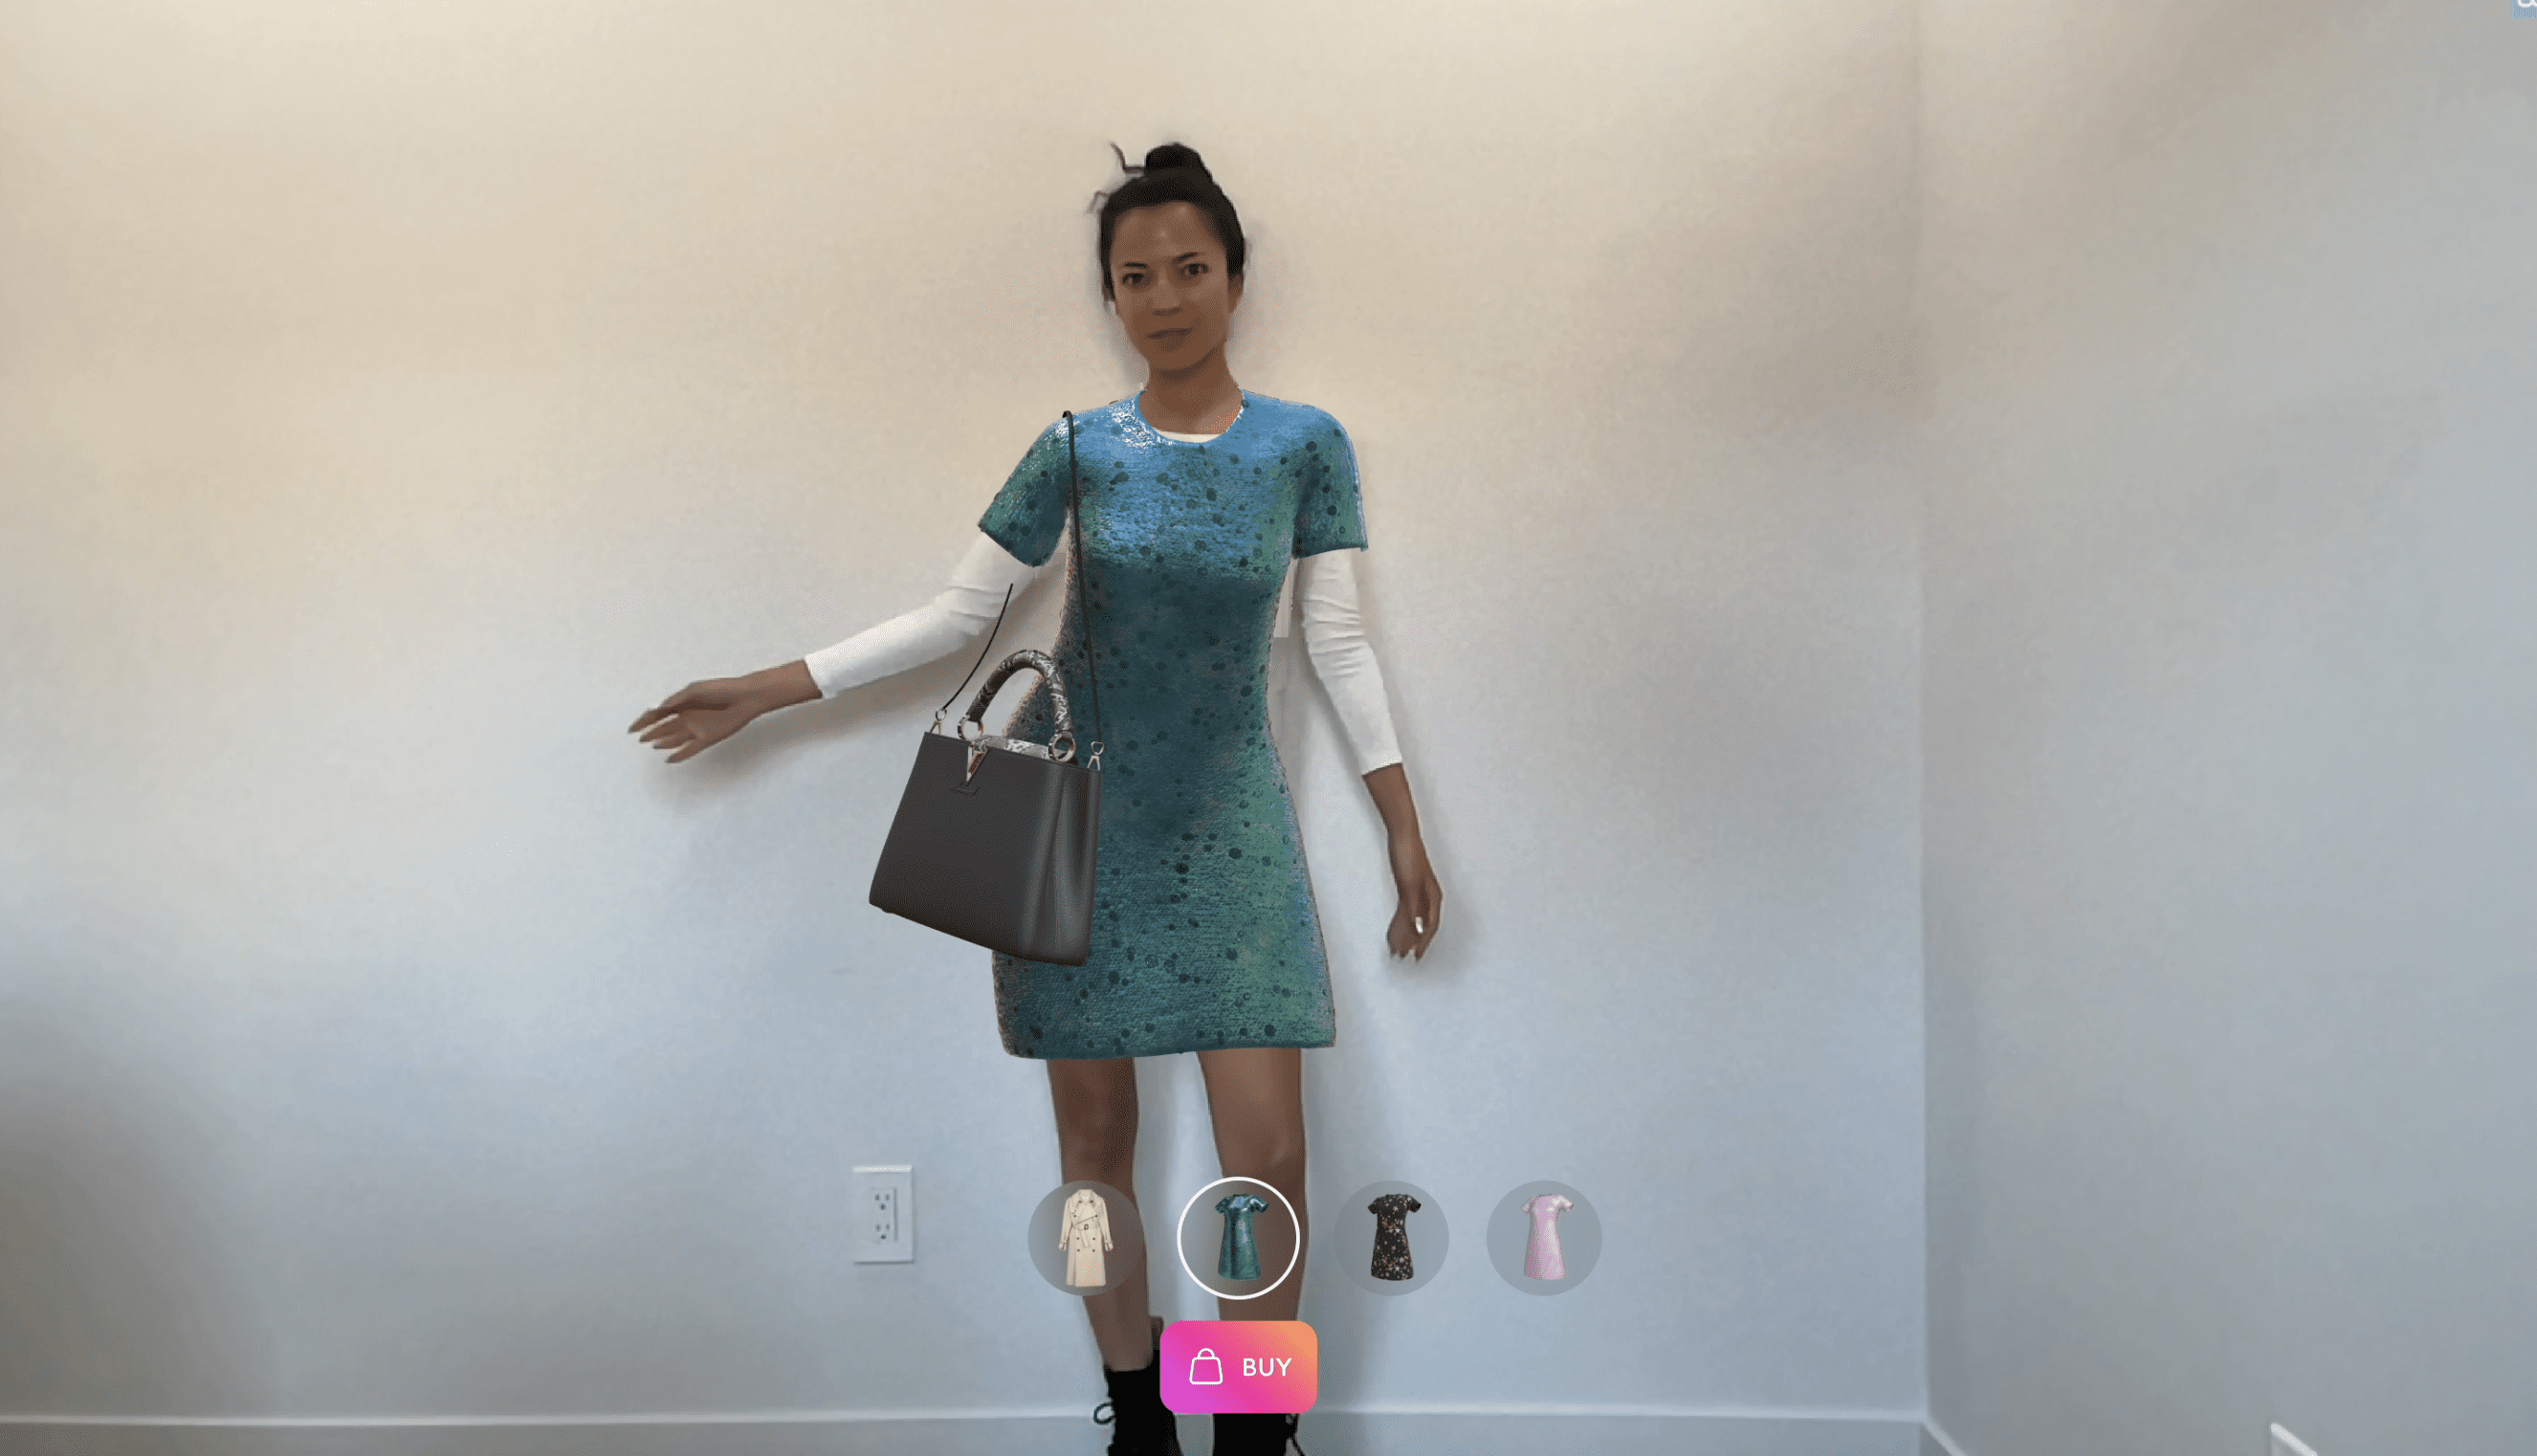 Why AR Shopping Is Key to the Future of Retail